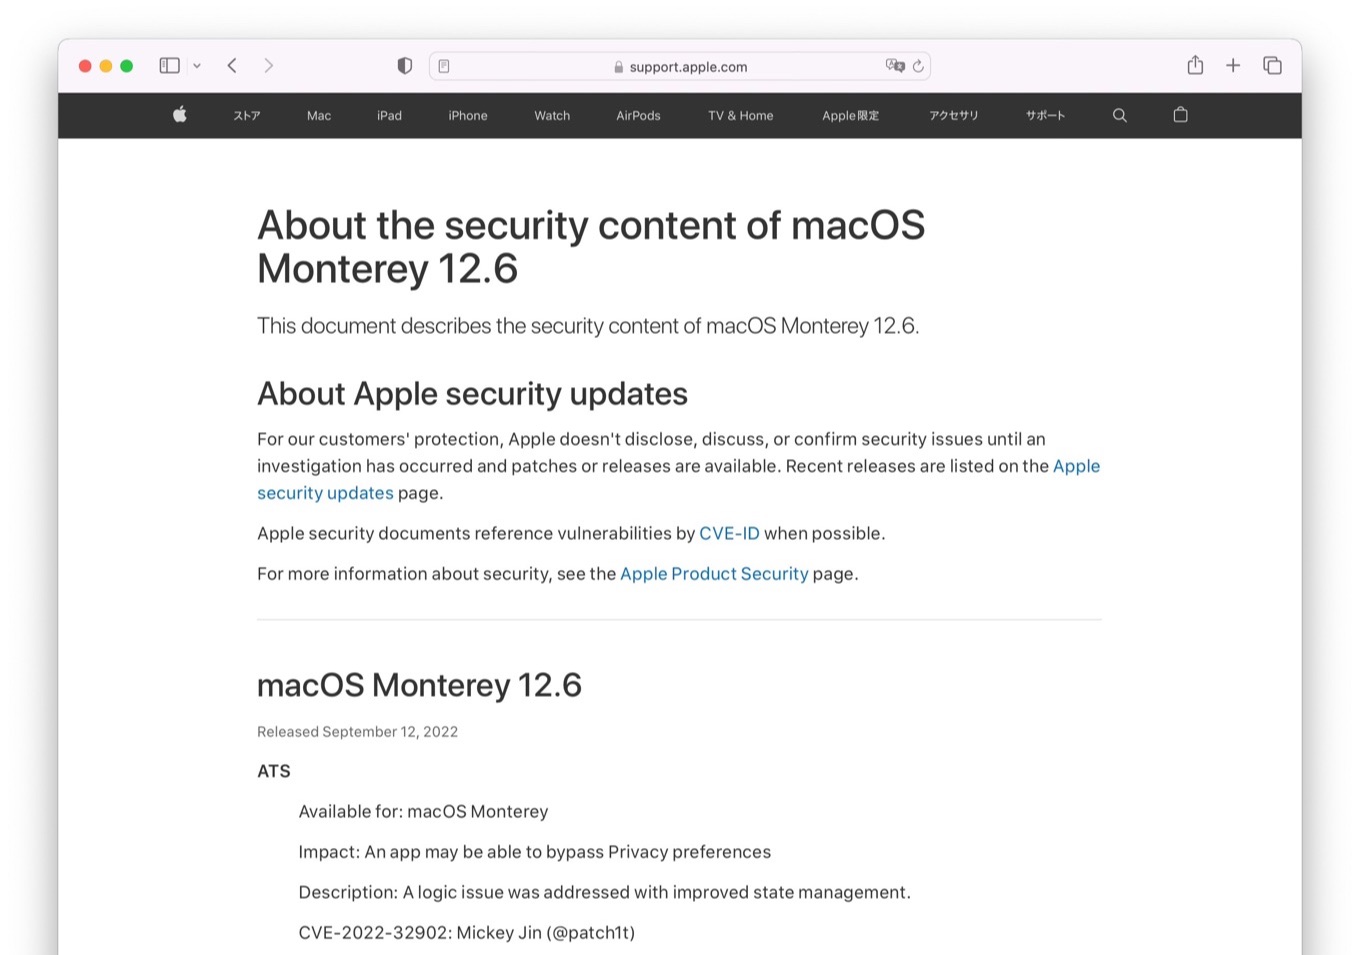 About the security content of macOS Monterey 12.6